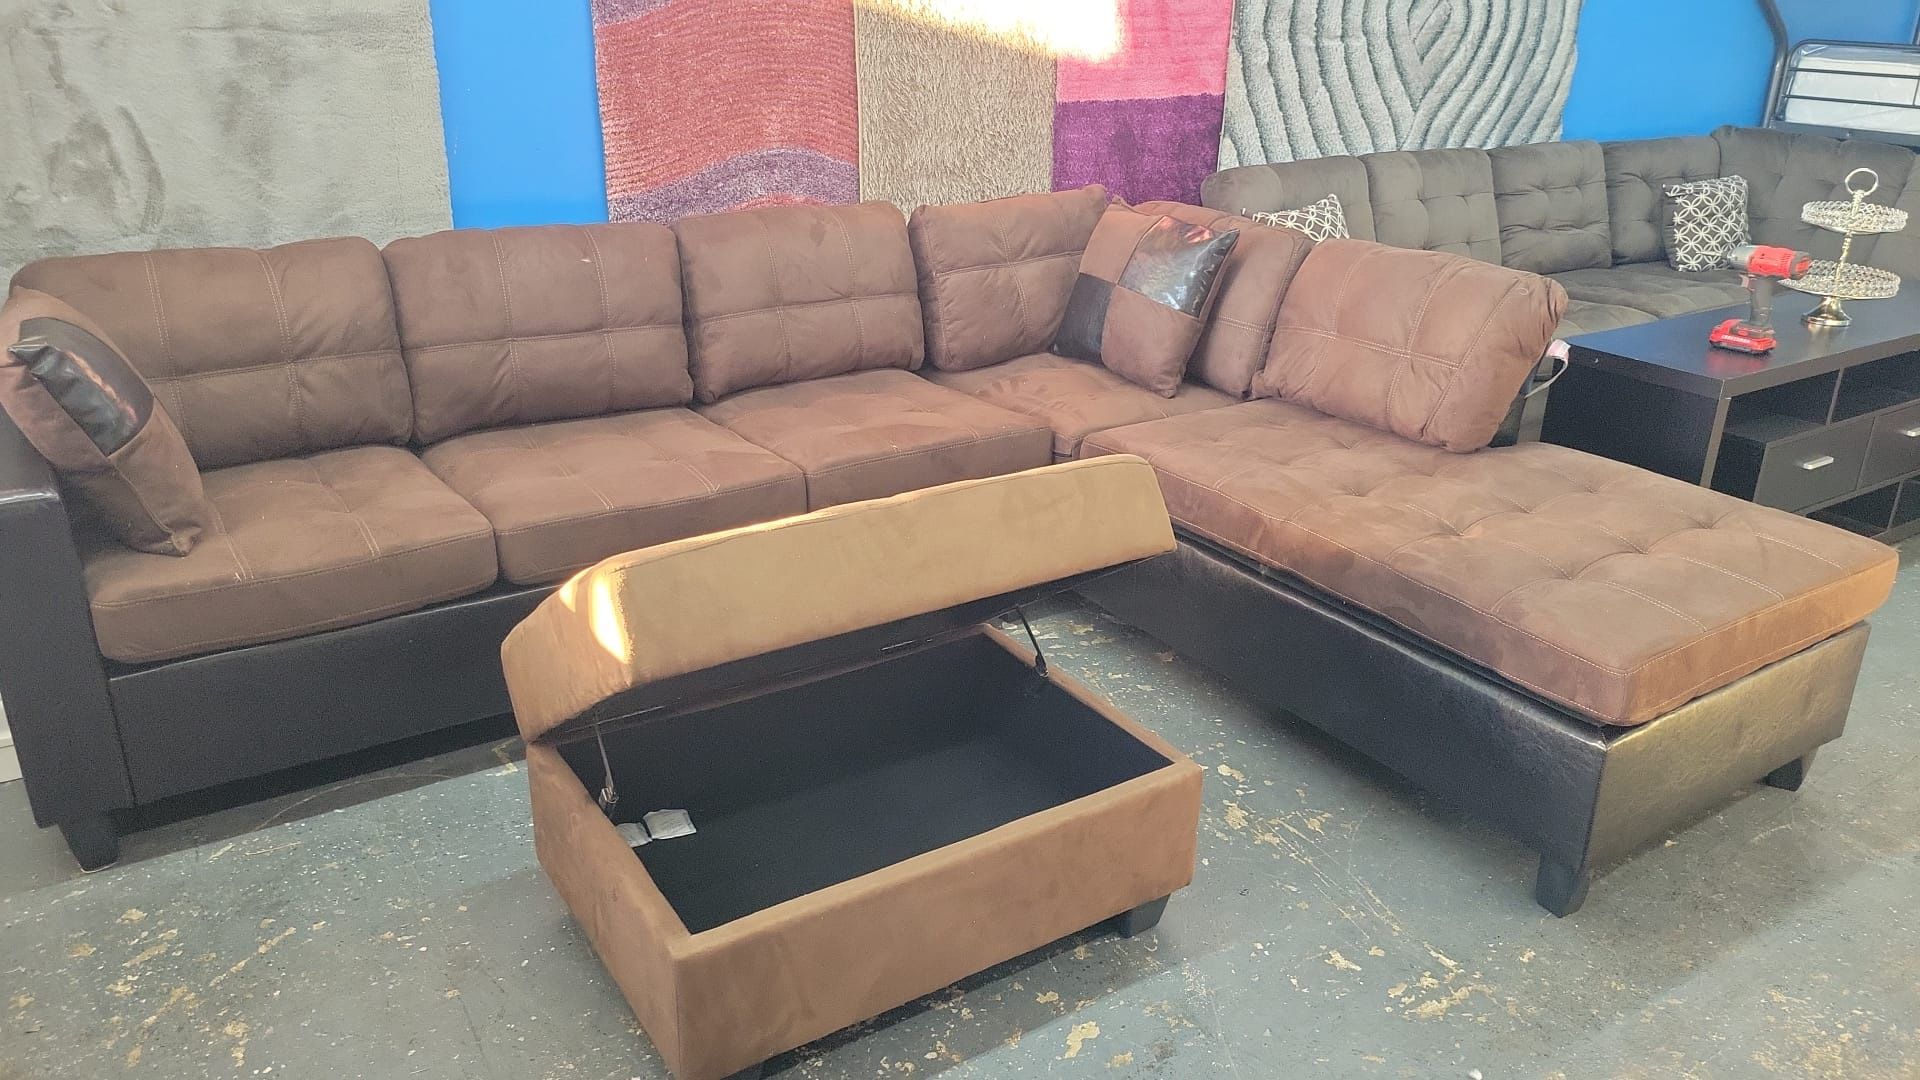 Sectional couch with ottoman $799